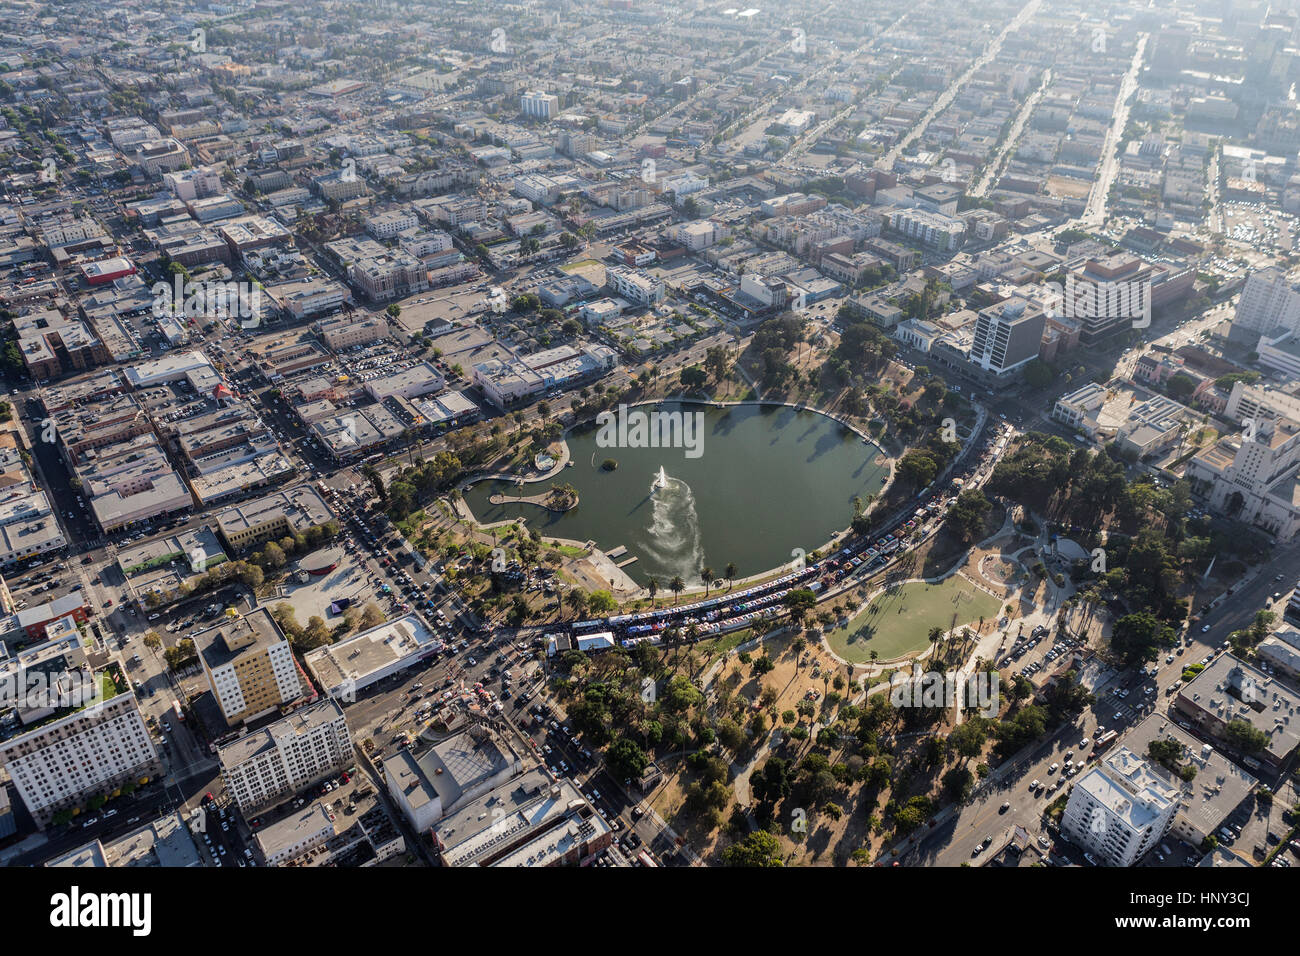 Los Angeles, California, USA - August 6, 2016:  Smoggy afternoon aerial view of urban architectural sprawl and MacArthur Park. Stock Photo